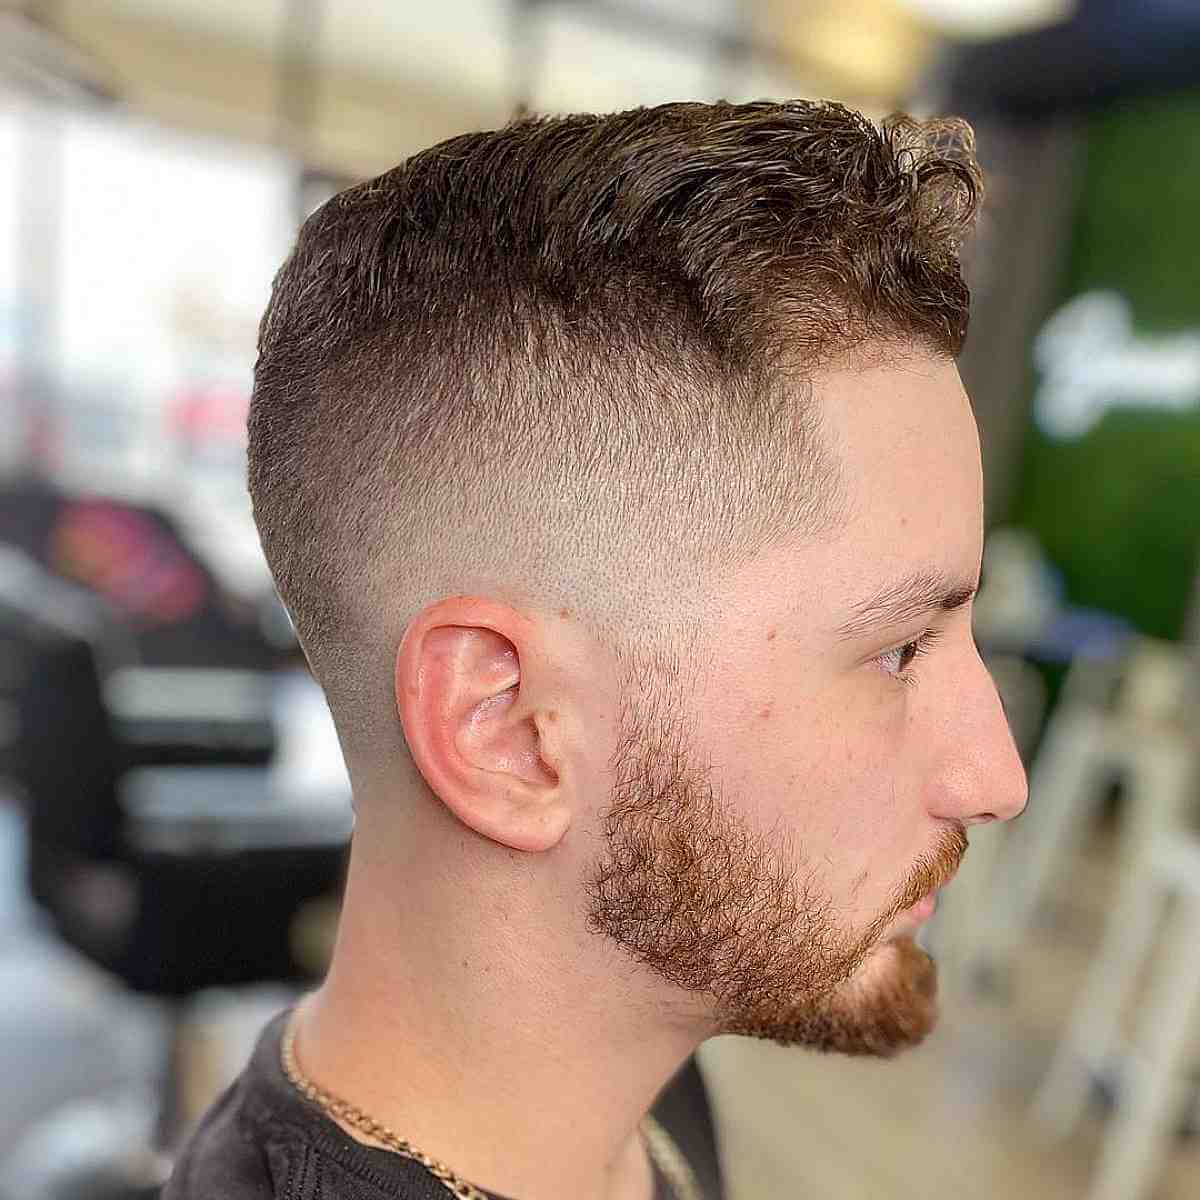 Drop Taper Skin Fade with Short Slicked Top